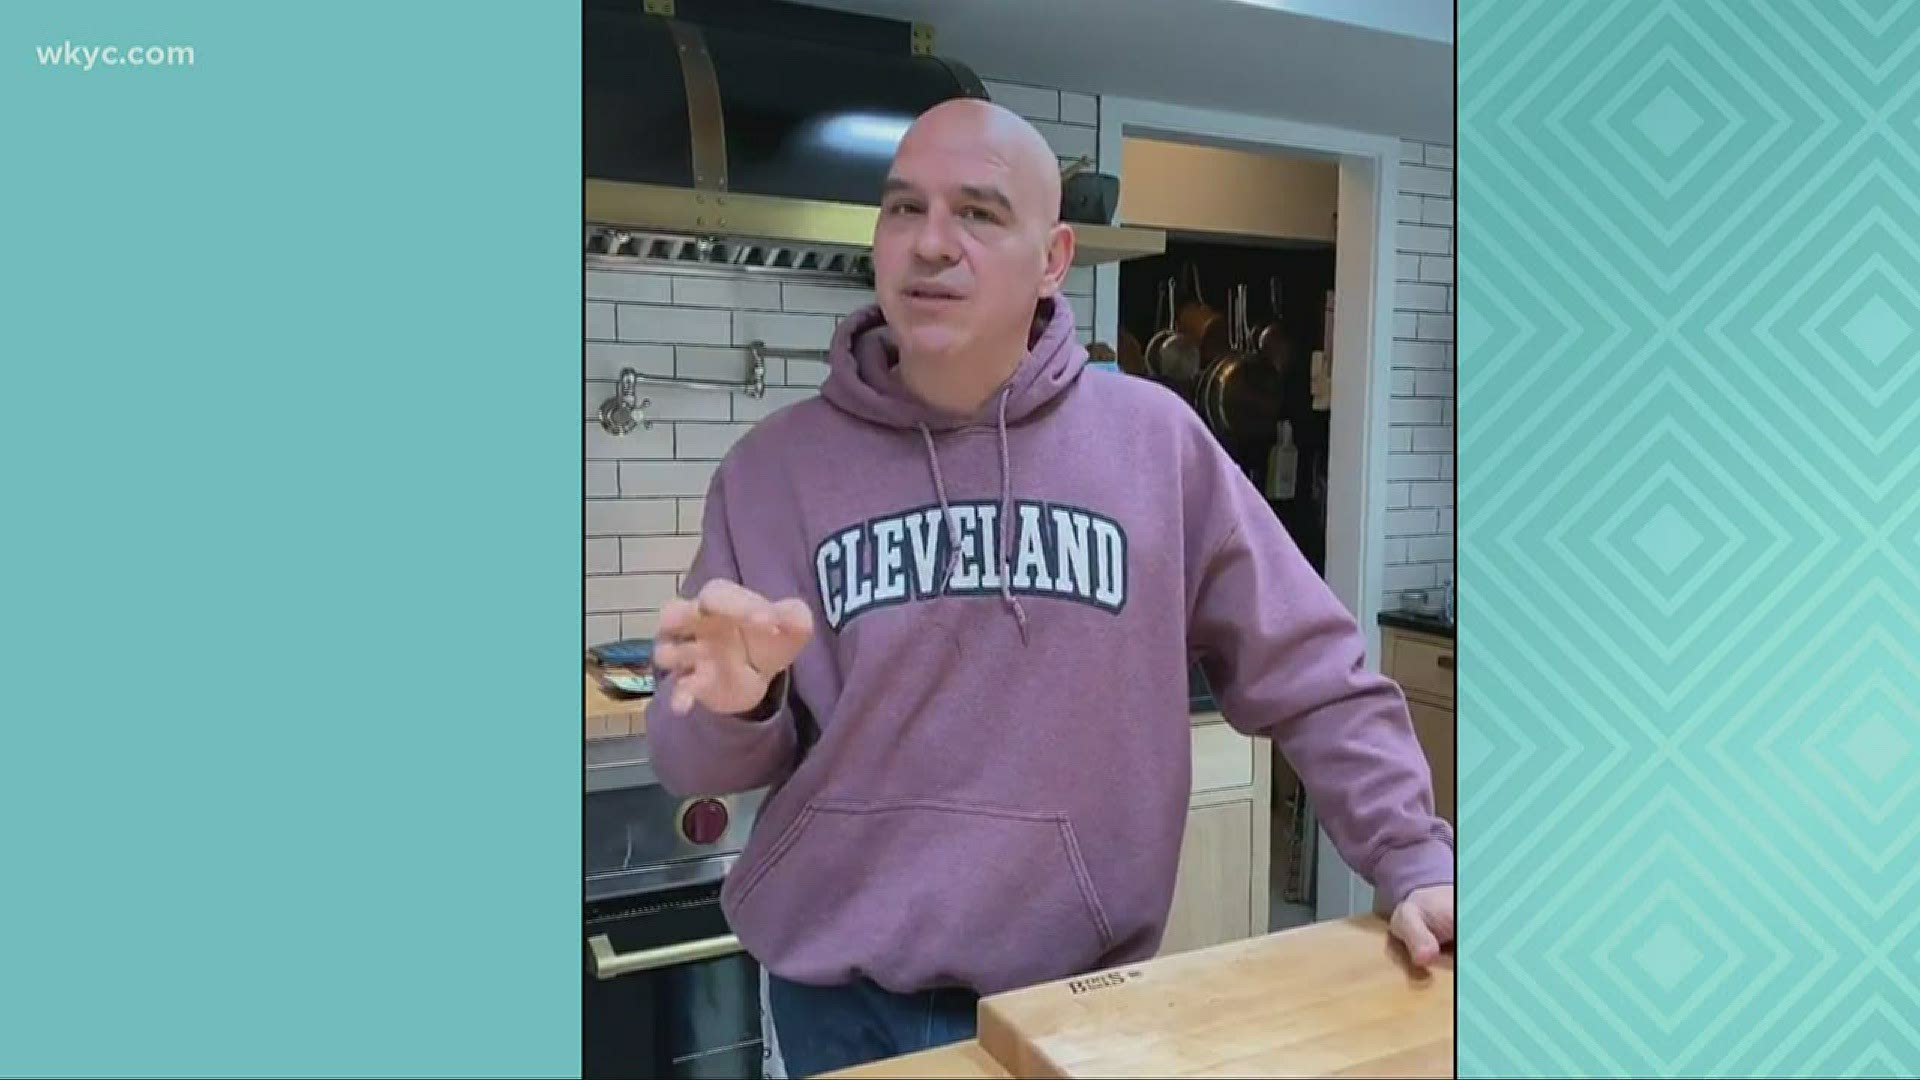 Looking to bring joy to a friend or family member during the coranvirus pandemic while donating to a good cause? Chef Michael Symon may have just the thing.